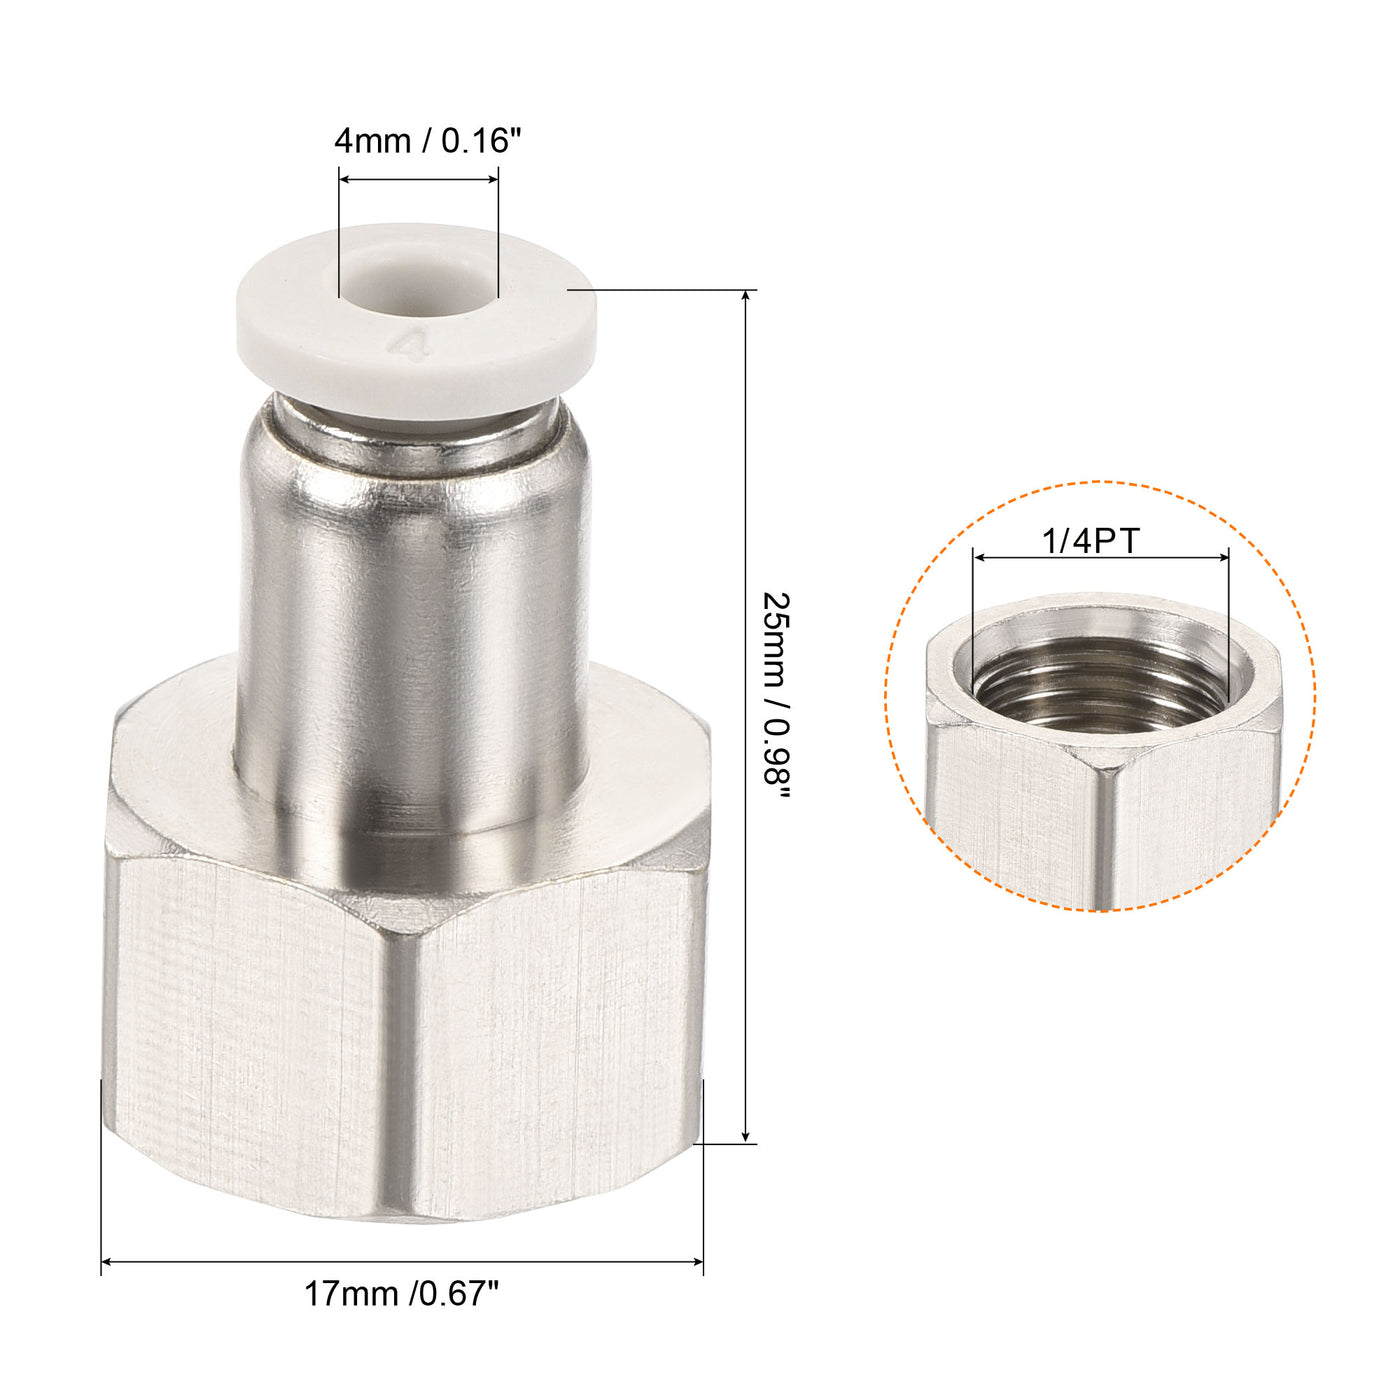 Harfington Push to Connect Fittings 1/4PT Female Thread Fit 4mm Tube OD Nickel-plated Copper Straight Union Fitting, Pack of 6